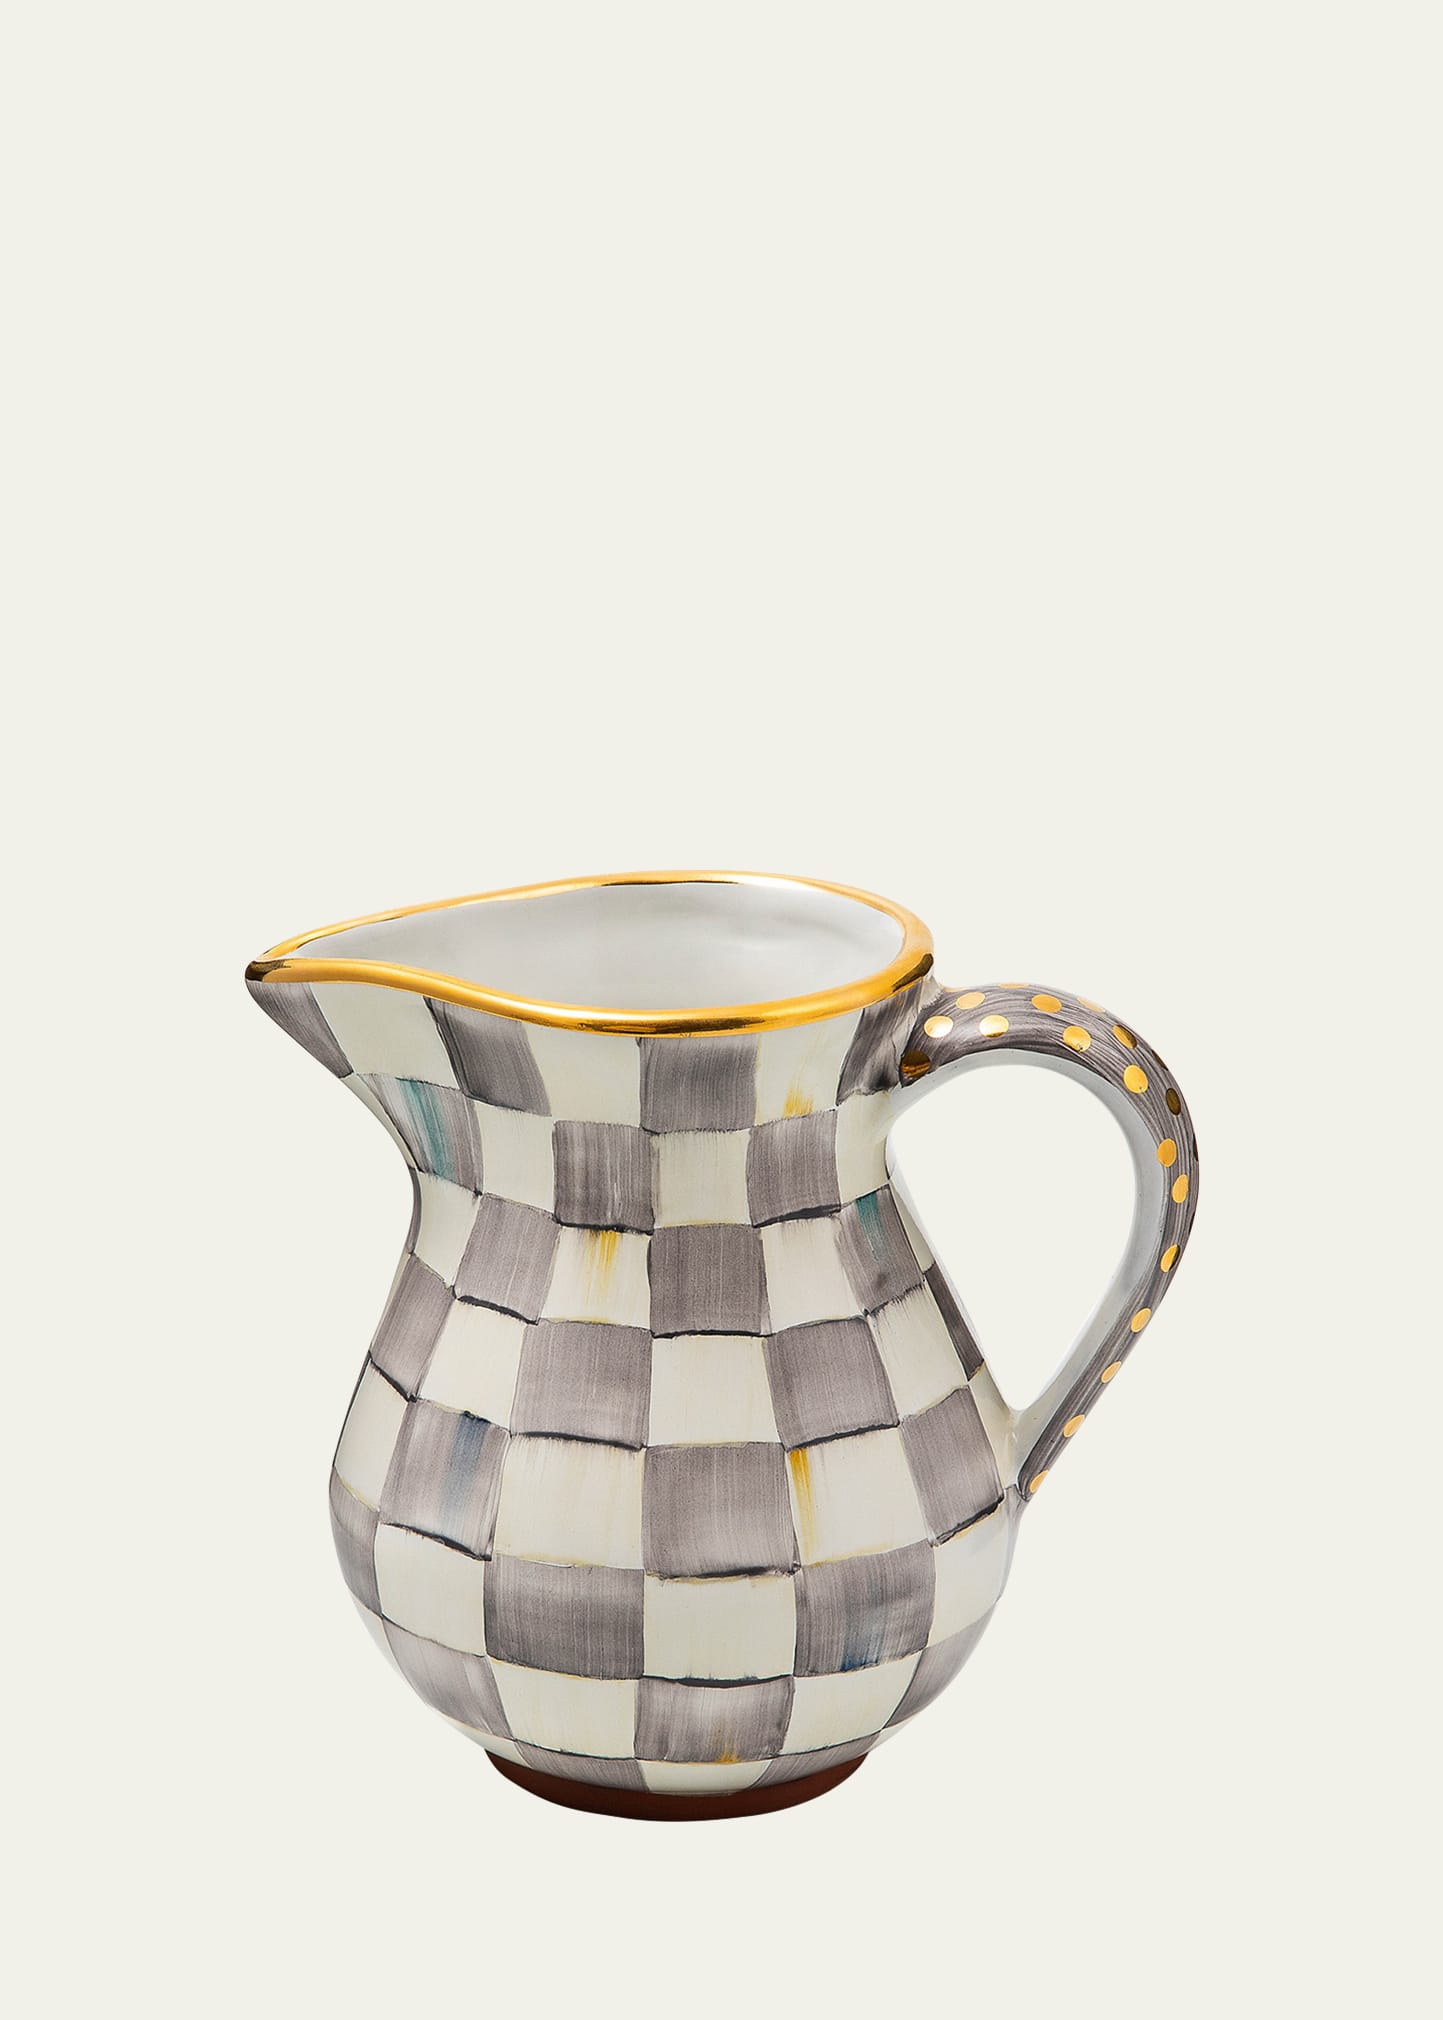 Mackenzie-childs Sterling Check Portly Pitcher, 52 Oz. In Gray